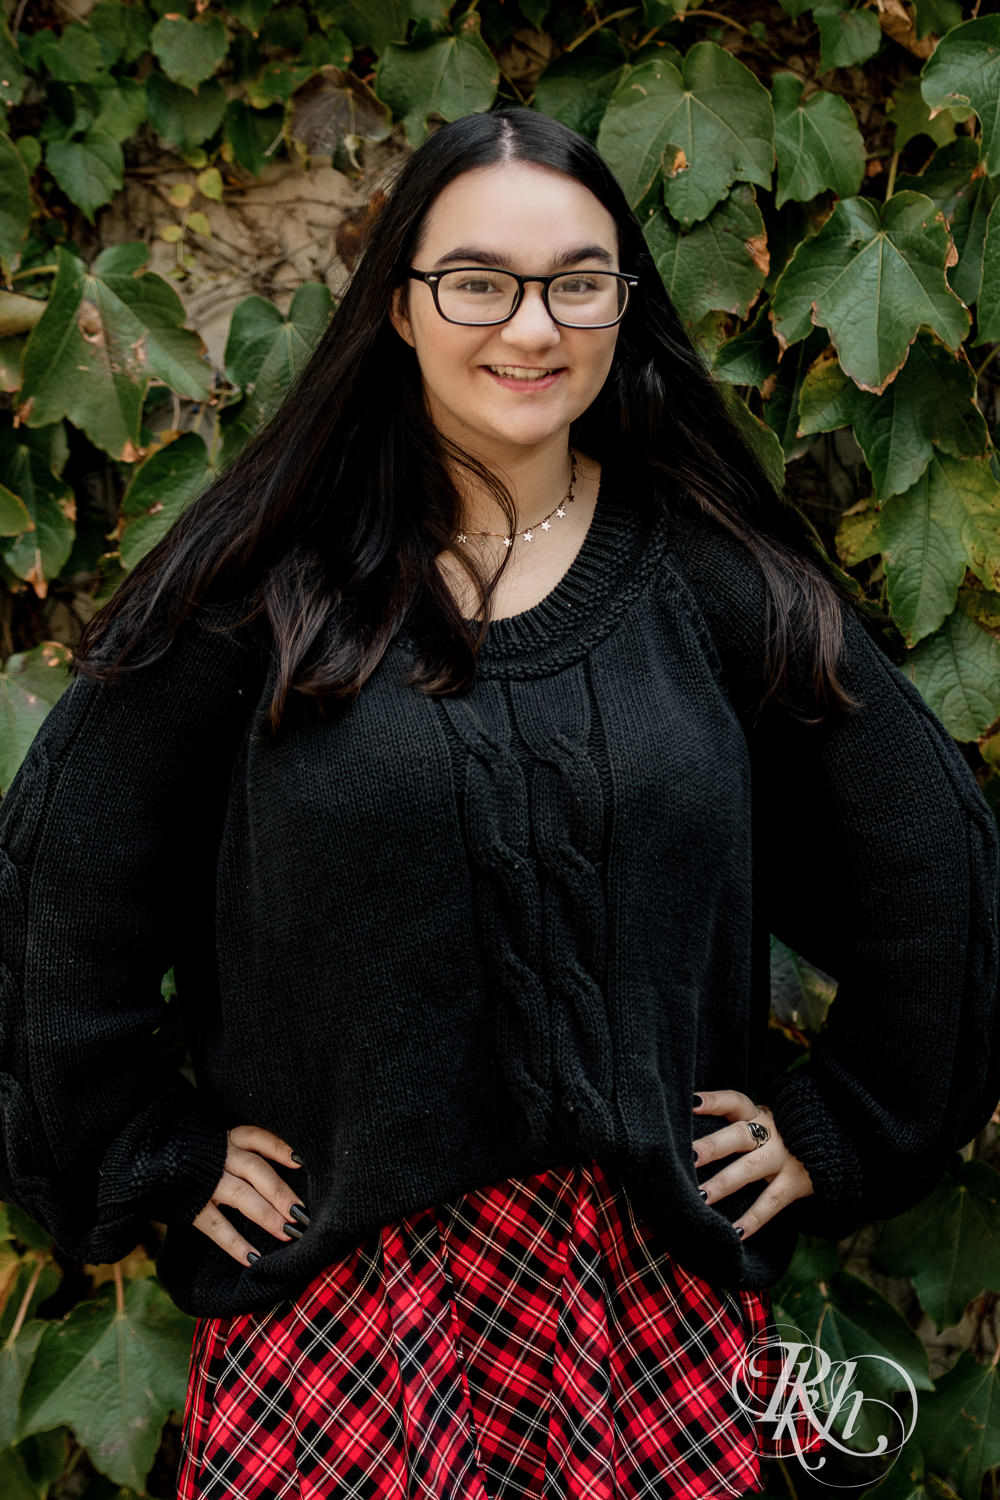 Girl dressed in glasses, sweater, and skirt looks at camera for senior photography in Mill City, Minneapolis.